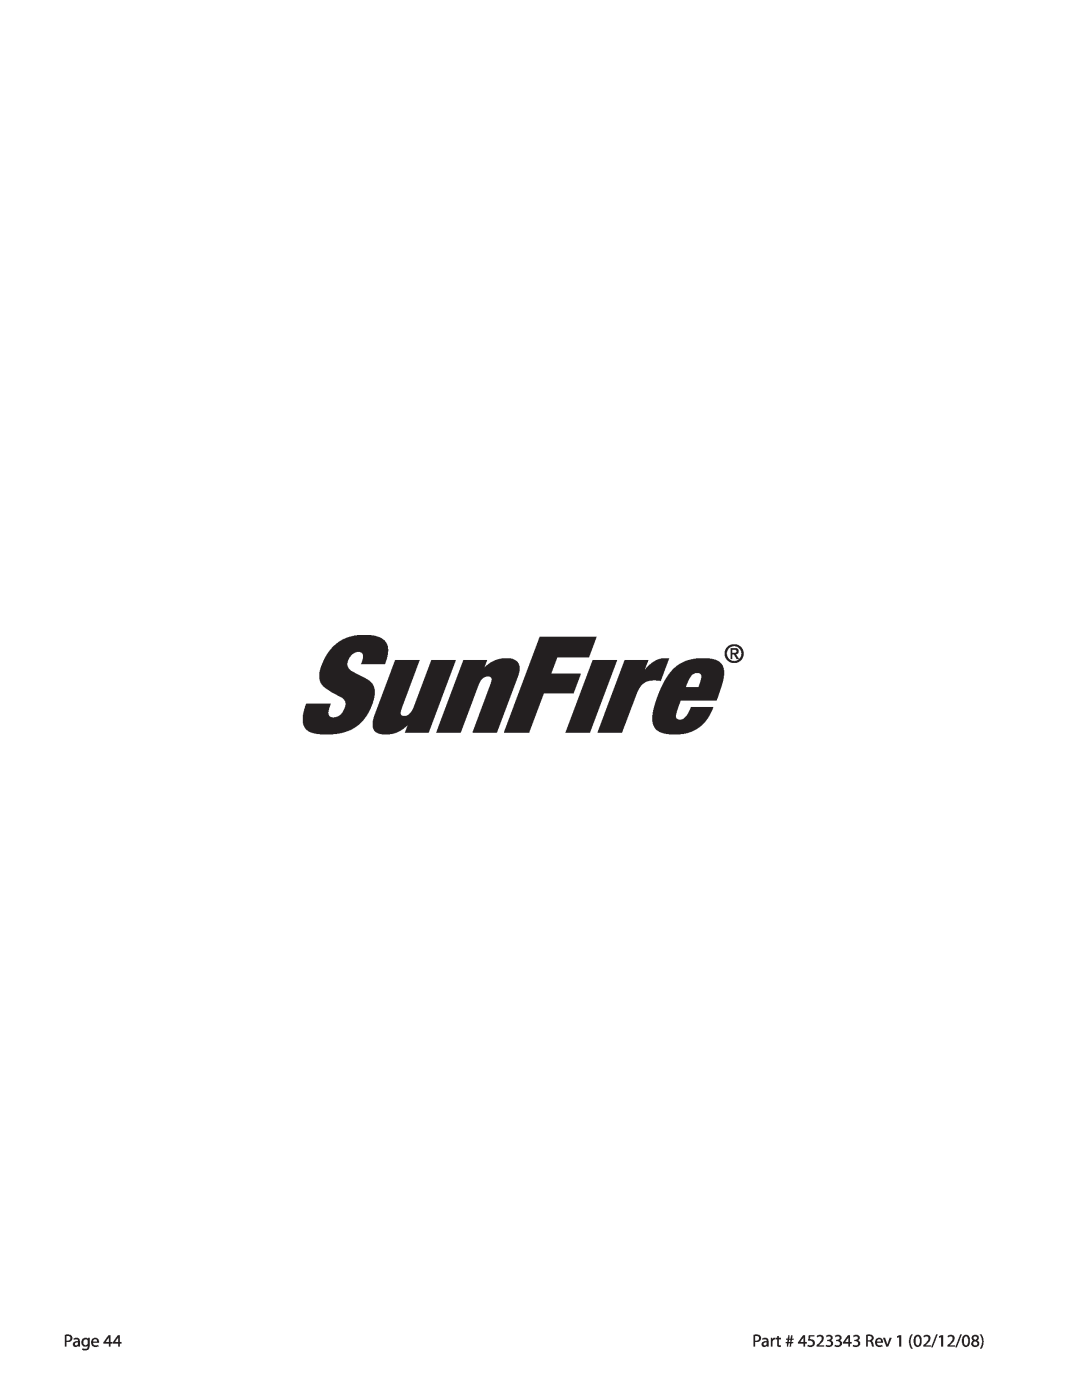 Sunfire X Series operation manual Page, Rev 1 02/12/08 